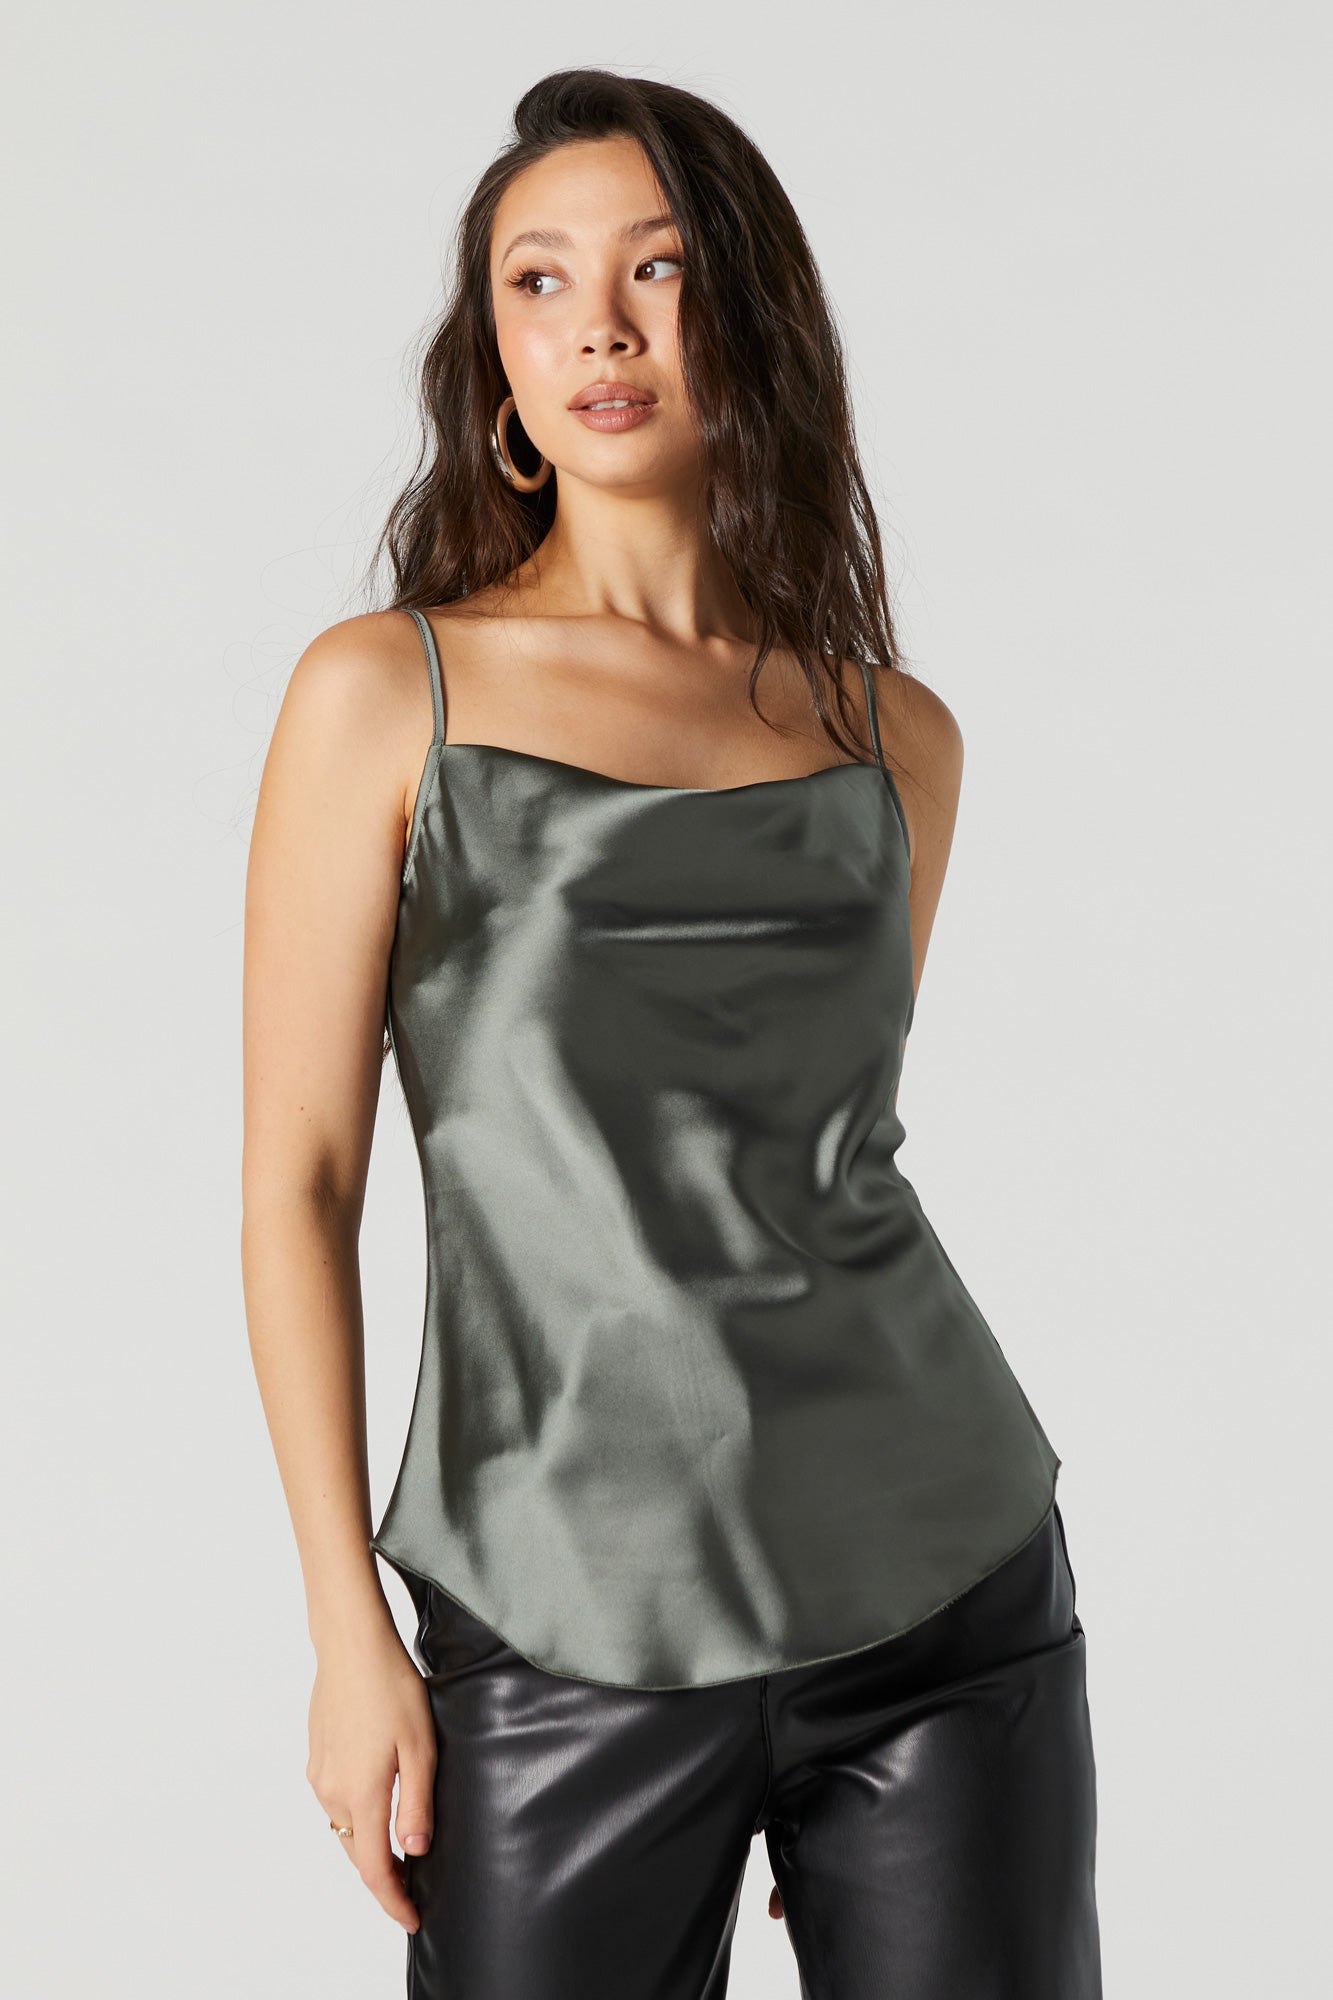 Strappy Cowl Neck Satin Cami Vest Top in Oyster Cream  One Nation Clothing  Strappy Cowl Neck Satin Cami Vest Top in Oyster Cream